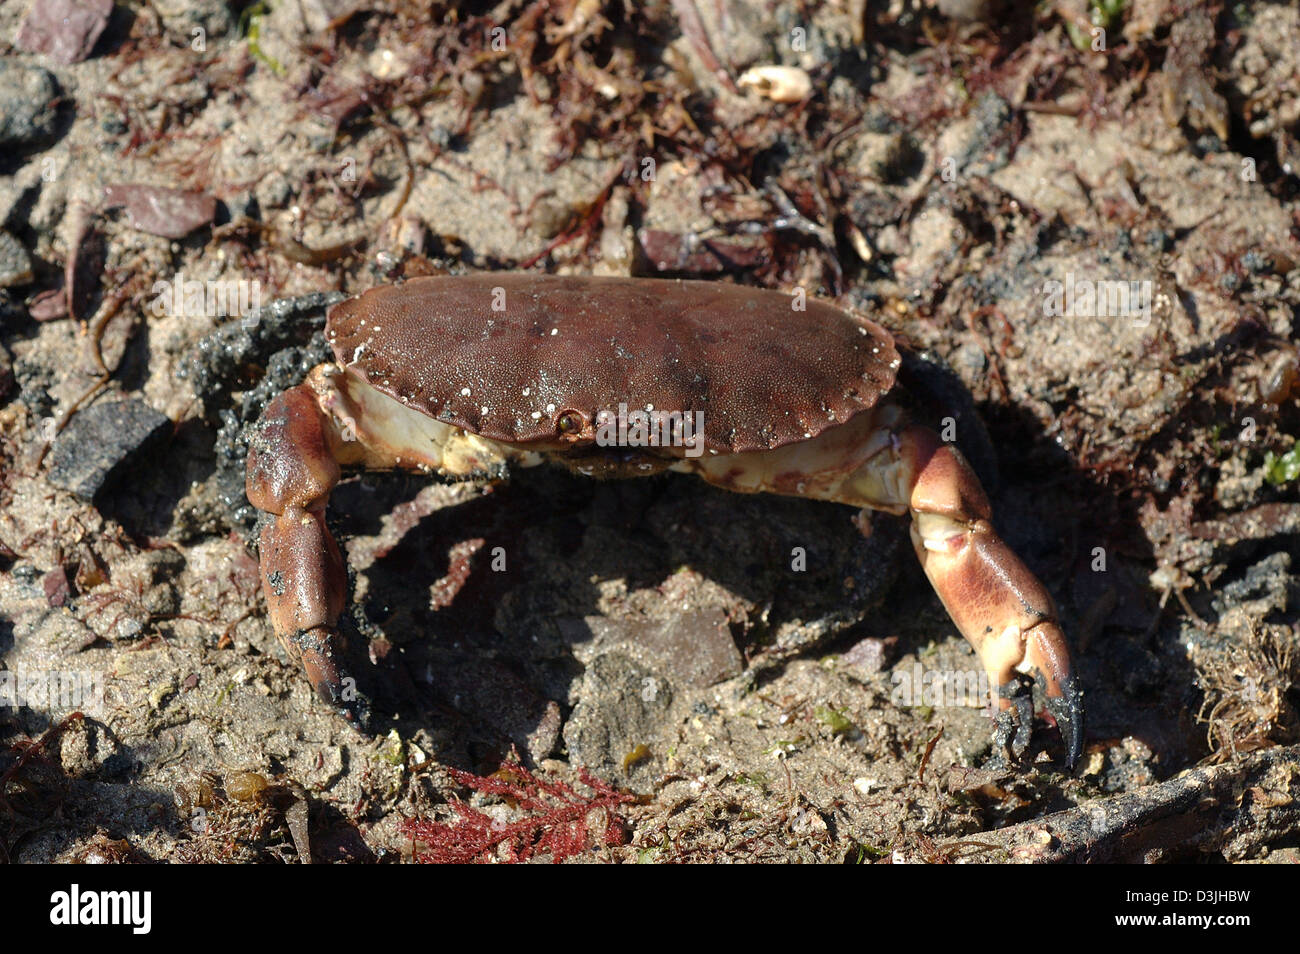 Edible crab (Cancer pagurus) exposed at low tide, UK. Stock Photo